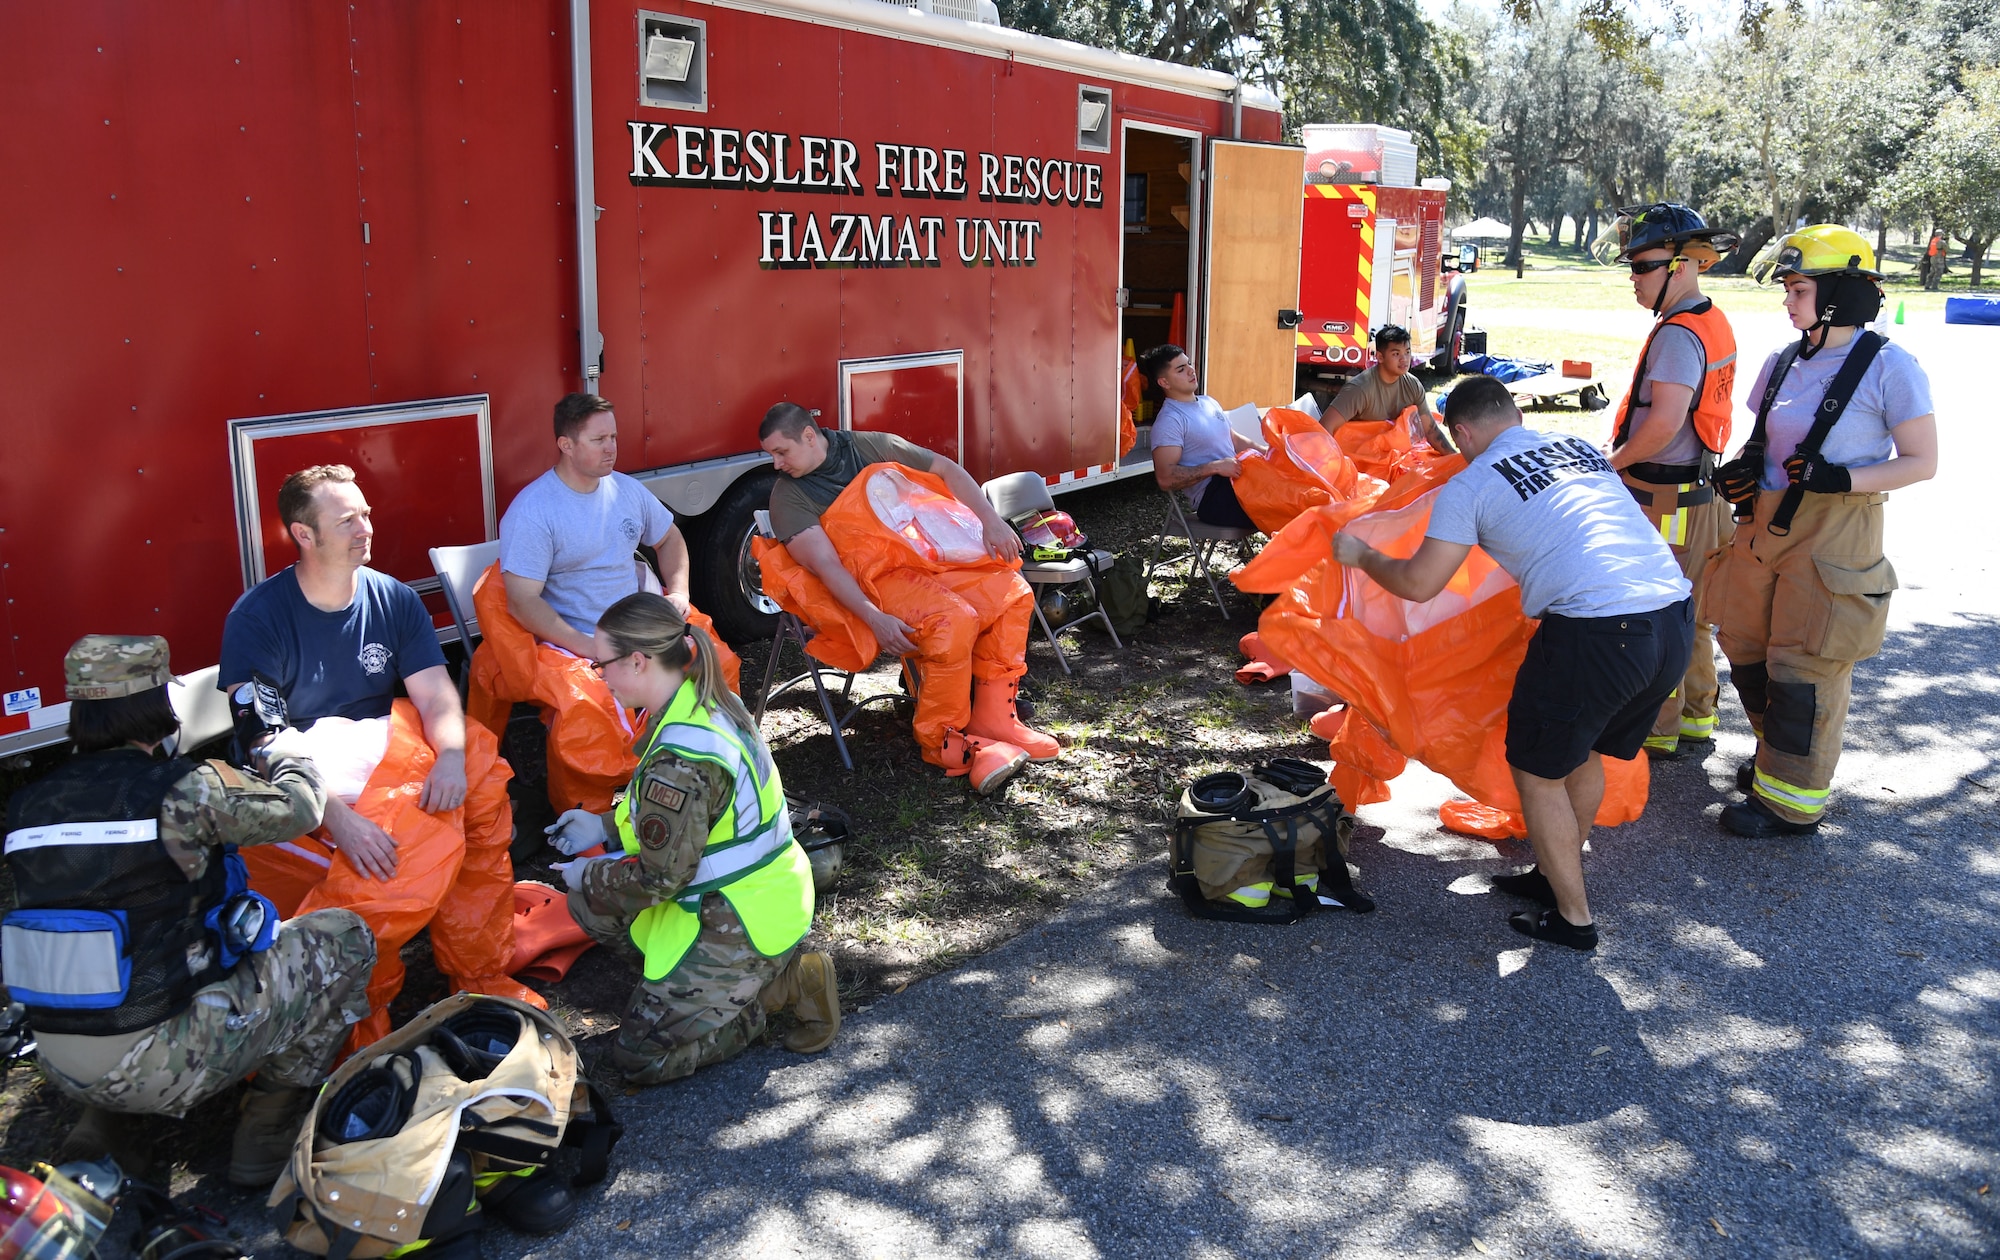 Keesler first responders prepare to retrieve simulated victims from the contaminated area during an Antiterrorism, Force Protection and Chemical, Biological, Radiological, Nuclear exercise at Keesler Air Force Base, Mississippi, March 17, 2022. The exercise tested the base's ability to respond to and recover from a mass casualty event. (U.S. Air Force photo by Kemberly Groue)